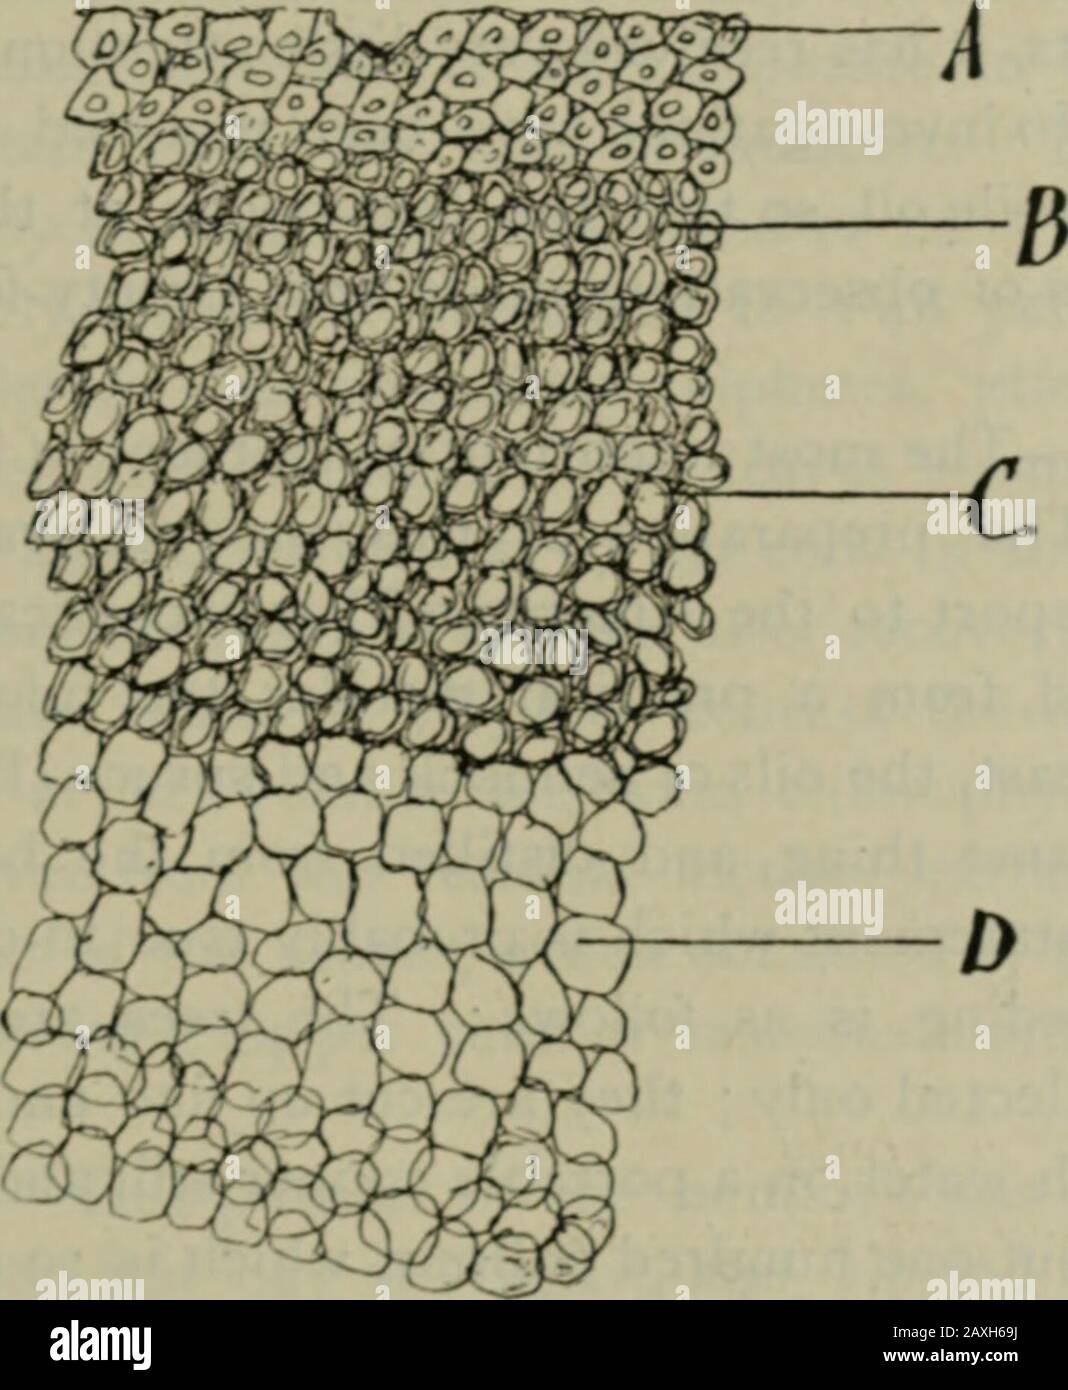 American journal of pharmacy . prickles, which is shown in longitudinal section, attached ;magnification, 150 diameters. A, epidermal cells ; b, parenchyma of upperportion of mid-rib ; c, a portion of the lamina of the leaf; d, xylem tissue ofmid-rib ; c, cambium zone ; /, phloem tissue of mid-rib ; g, parenchyma oflower portion of mid-rib ; h, collenchyma tissue ; i, slightly lignified tissue ofthe prickle, which occurred on the mid-rib and was cut through longitudinally;k, epidermal tissue, more lignified. Am. Jonr. Pbarm.)February. Ift97. j Solatiion Carolinense. 89 Steyn.—Zinc chloriodide Stock Photo